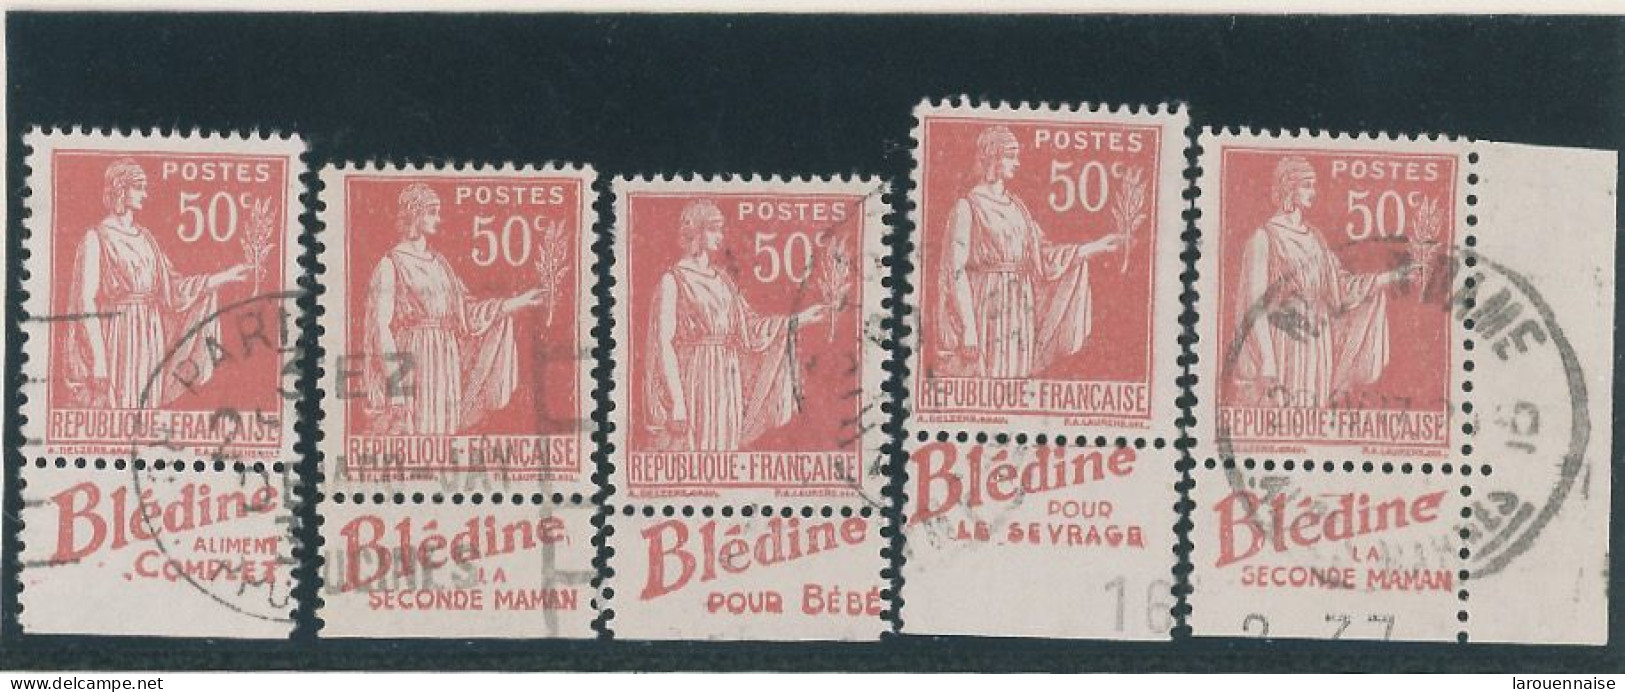 BANDE PUB -N°283  PAIX TYPE III -50c ROUGE -Obl - PUB -BLEDINE -(Maury 223) -5 EXEMPLAIRES DIFFÉRENTS - Used Stamps